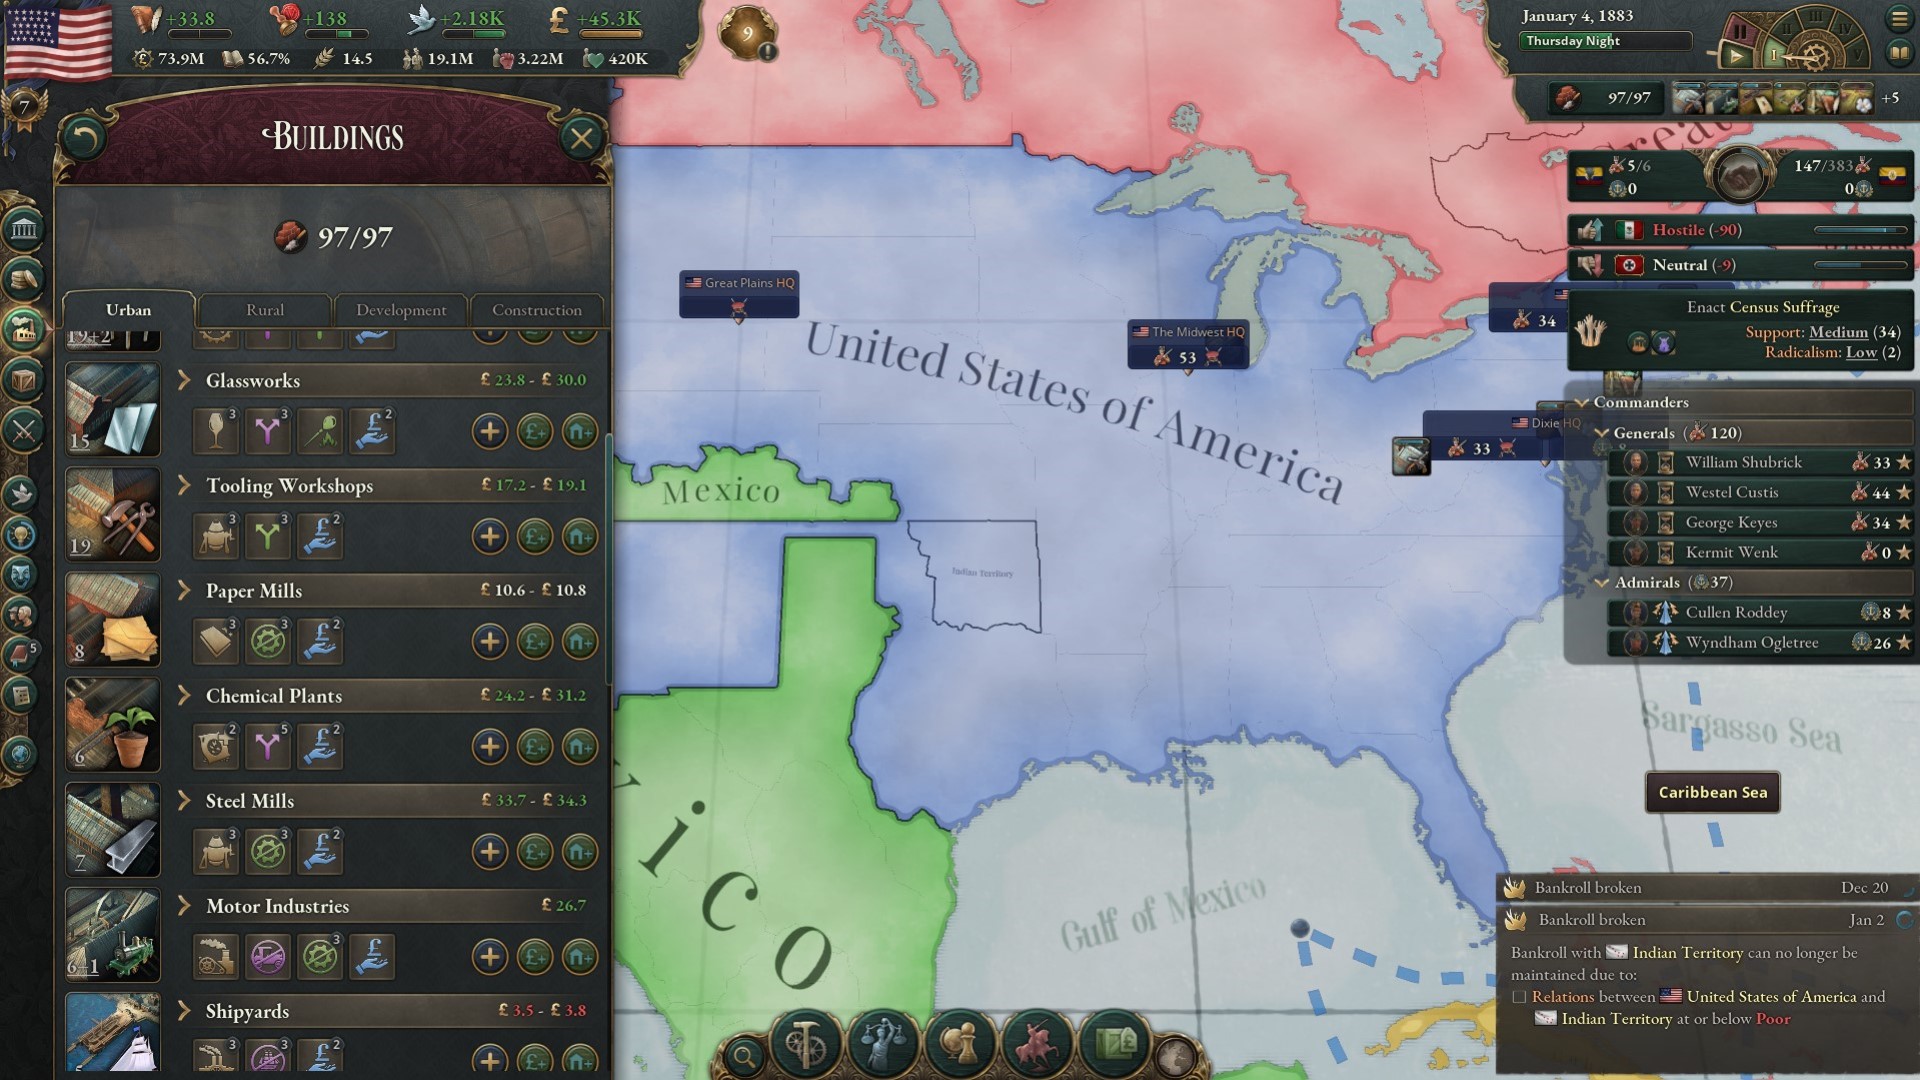 Victoria 3 review - a screenshot showing buildings in the USA